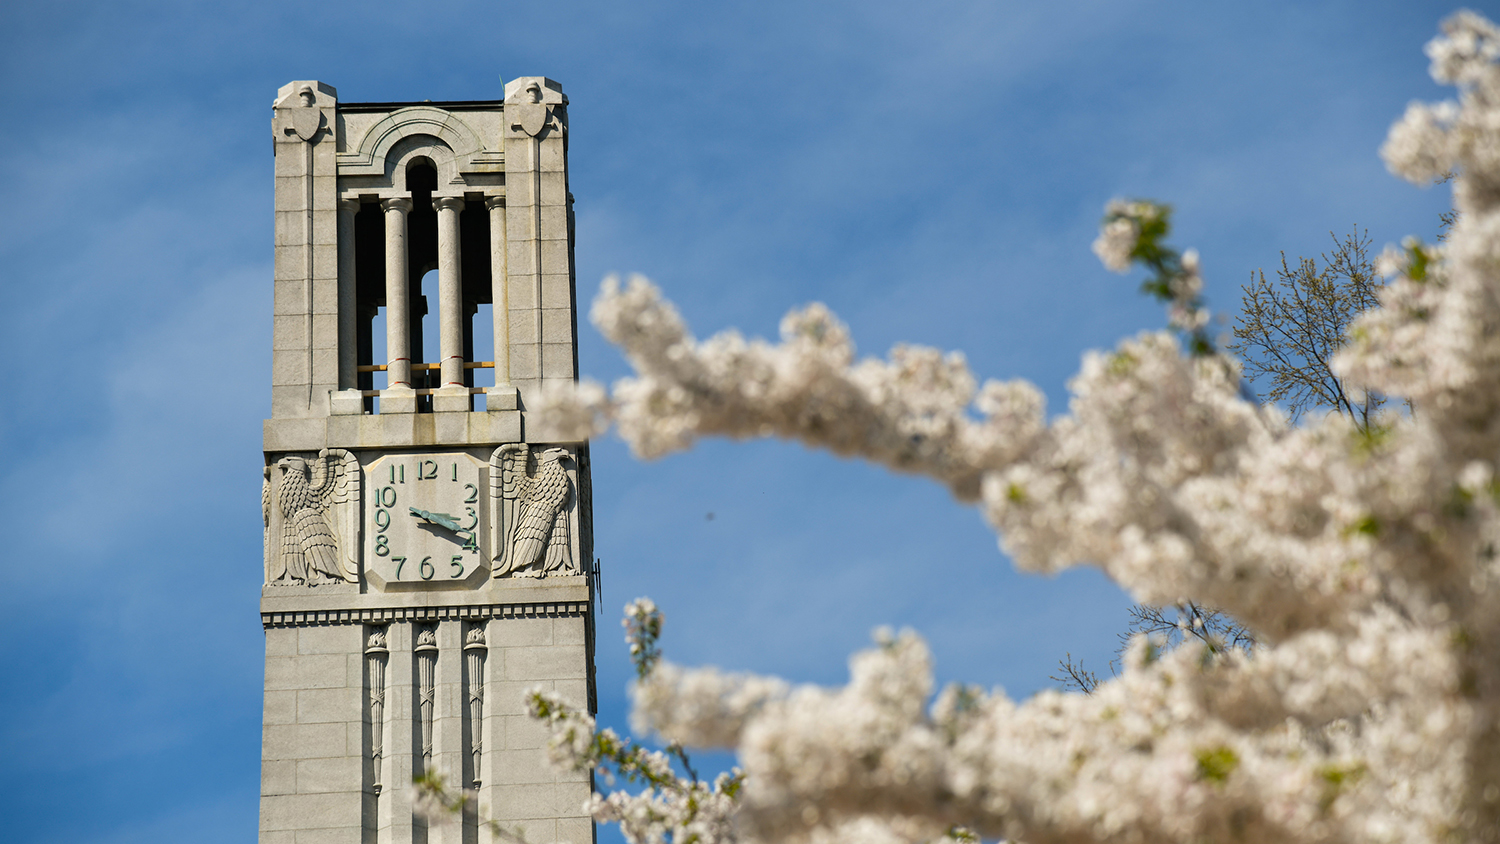 Belltower framed by white blooms on a tree in spring.